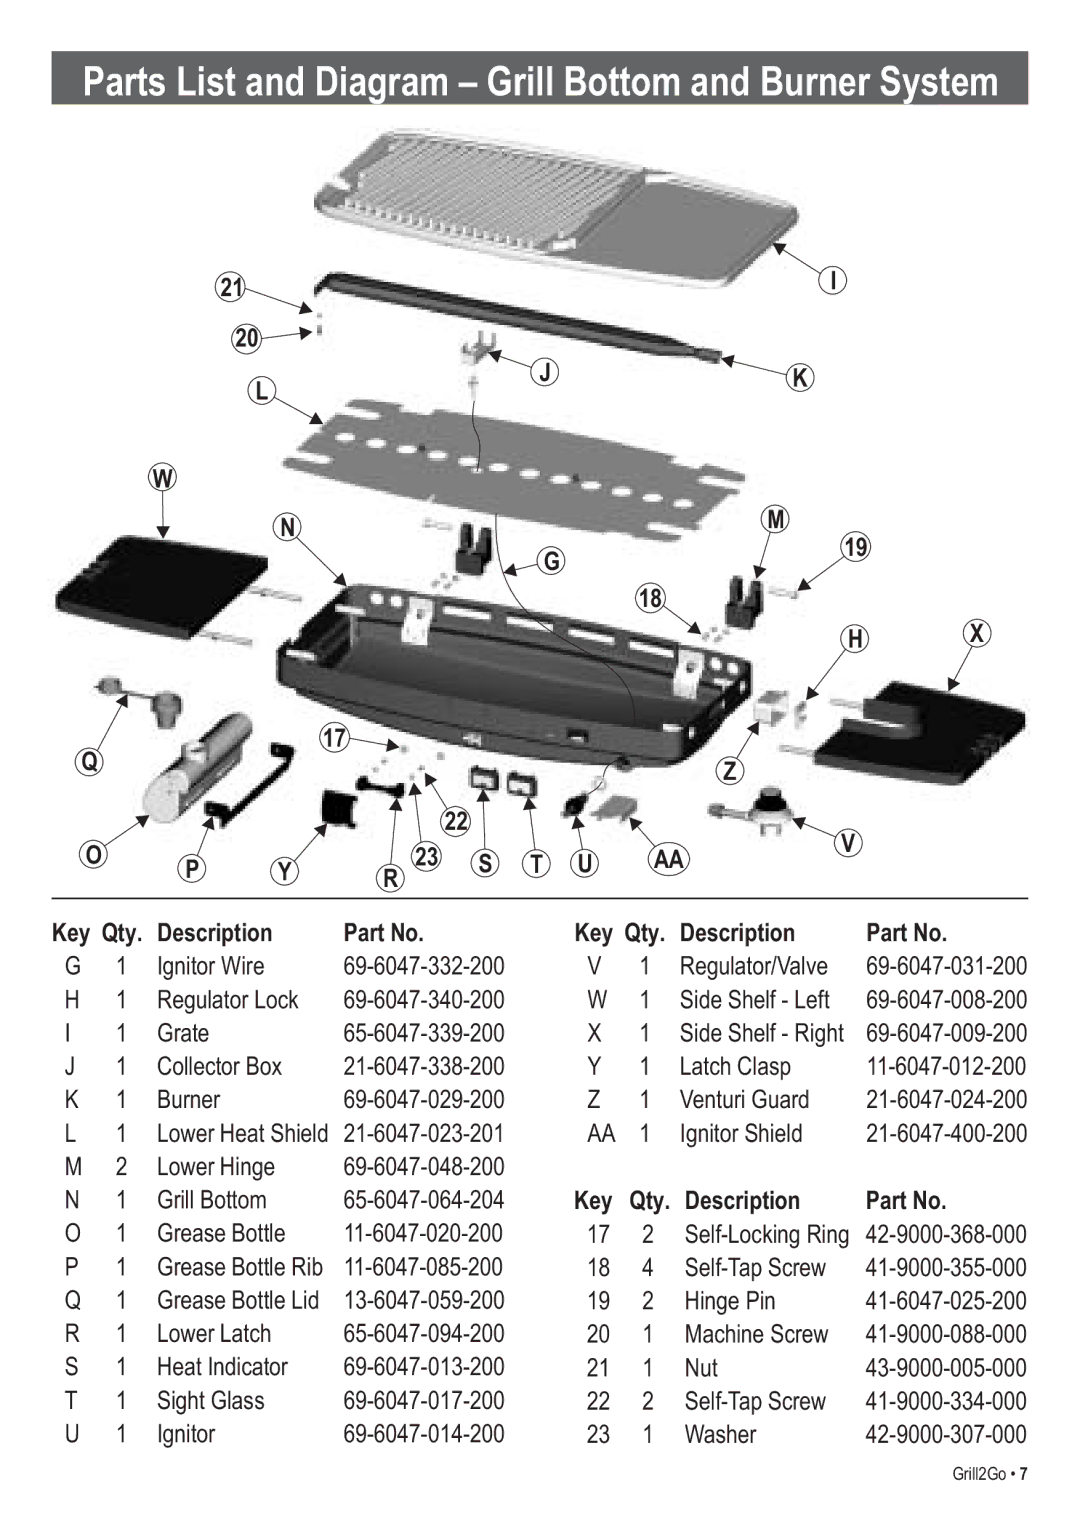 Thermos 465621303, 465611003 manual Parts List and Diagram Grill Bottom and Burner System, Key Qty. Description 